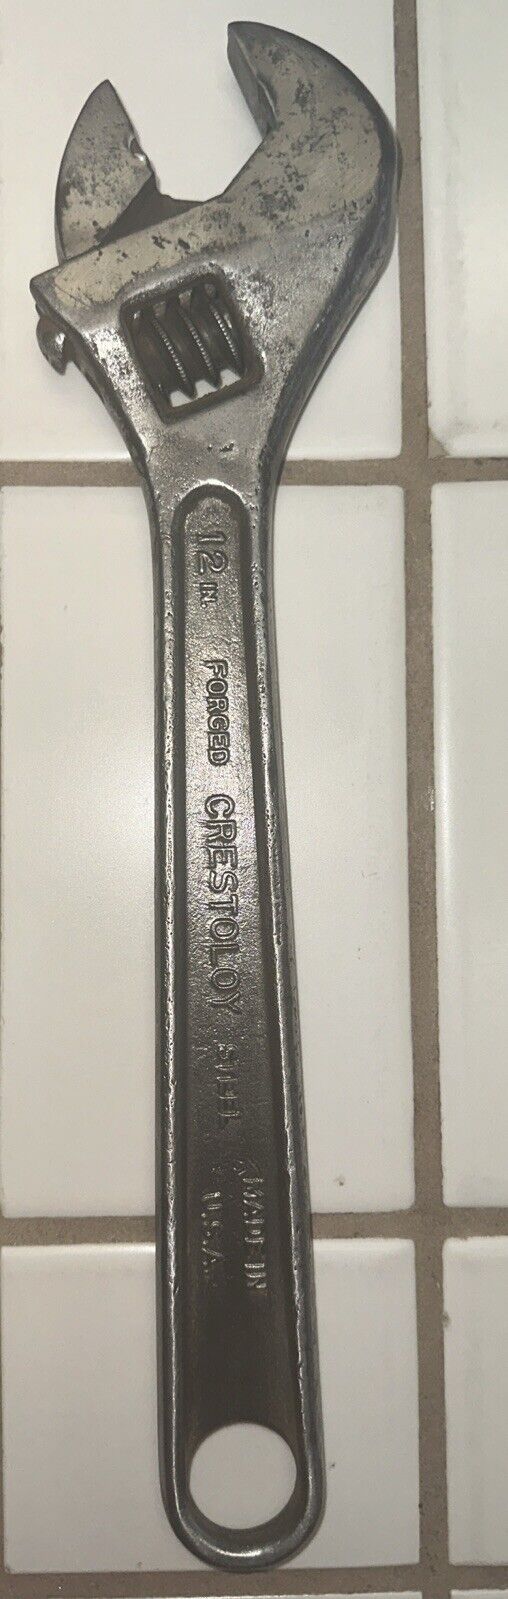 Vintage Crescent 12 Inch Adjustable Wrench Crescent Tool Co. Jamestown, NY USA